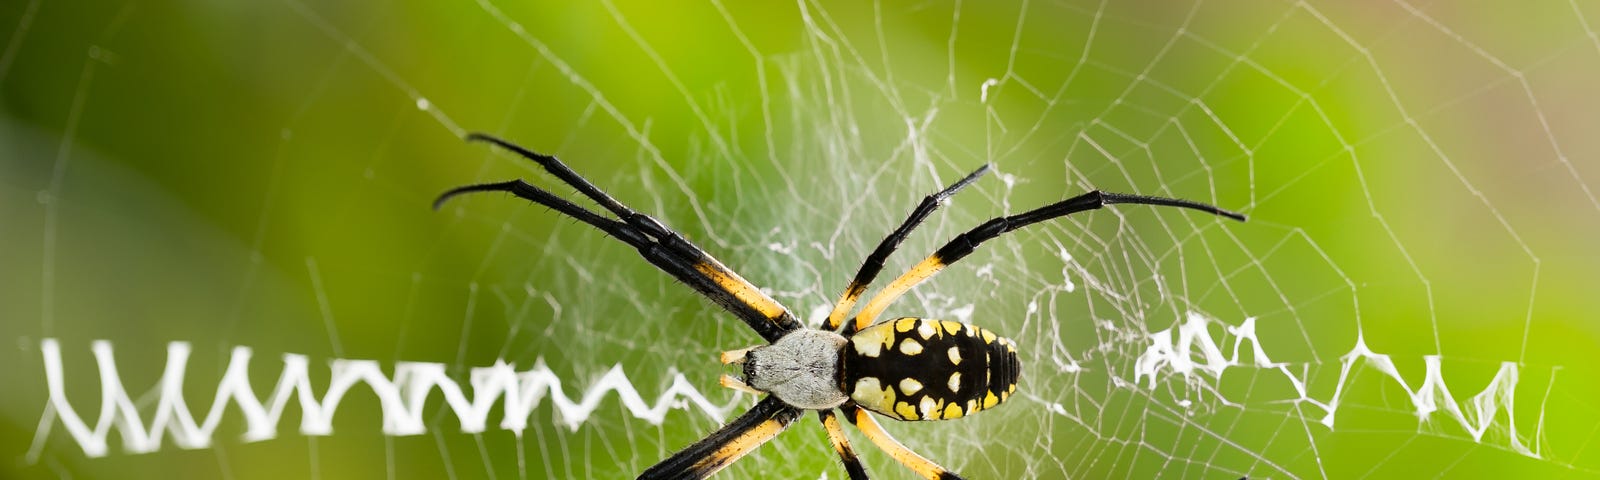 A close-up image of a Argiope aurantia spider on a web. This species is otherwise known as the Writing Spider.